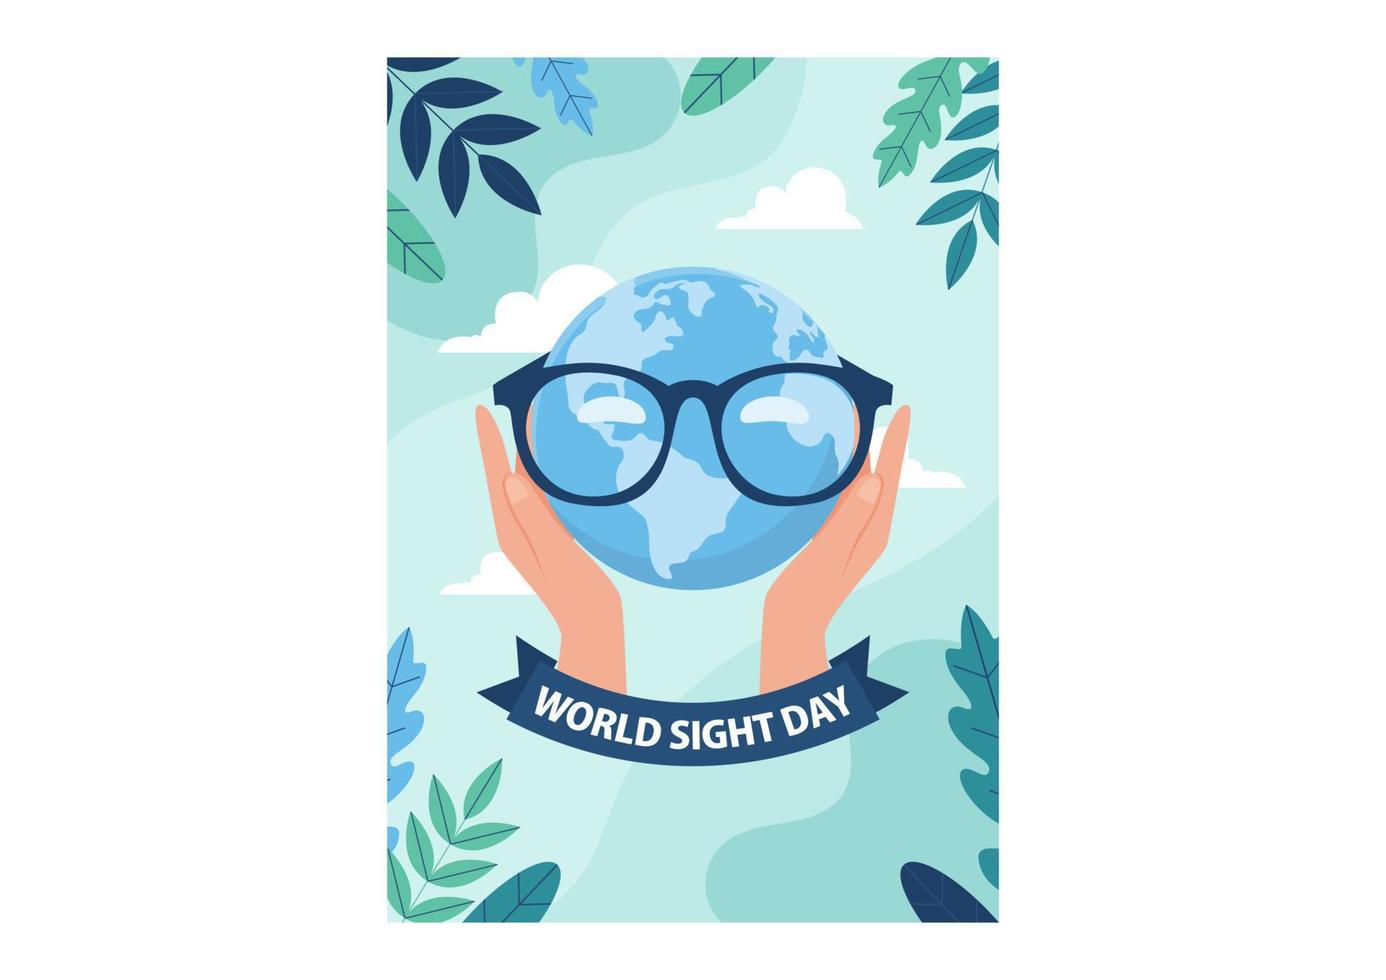 Sky blue background of World Sight Day illustration on healthcare icon element. Vector eps 10.